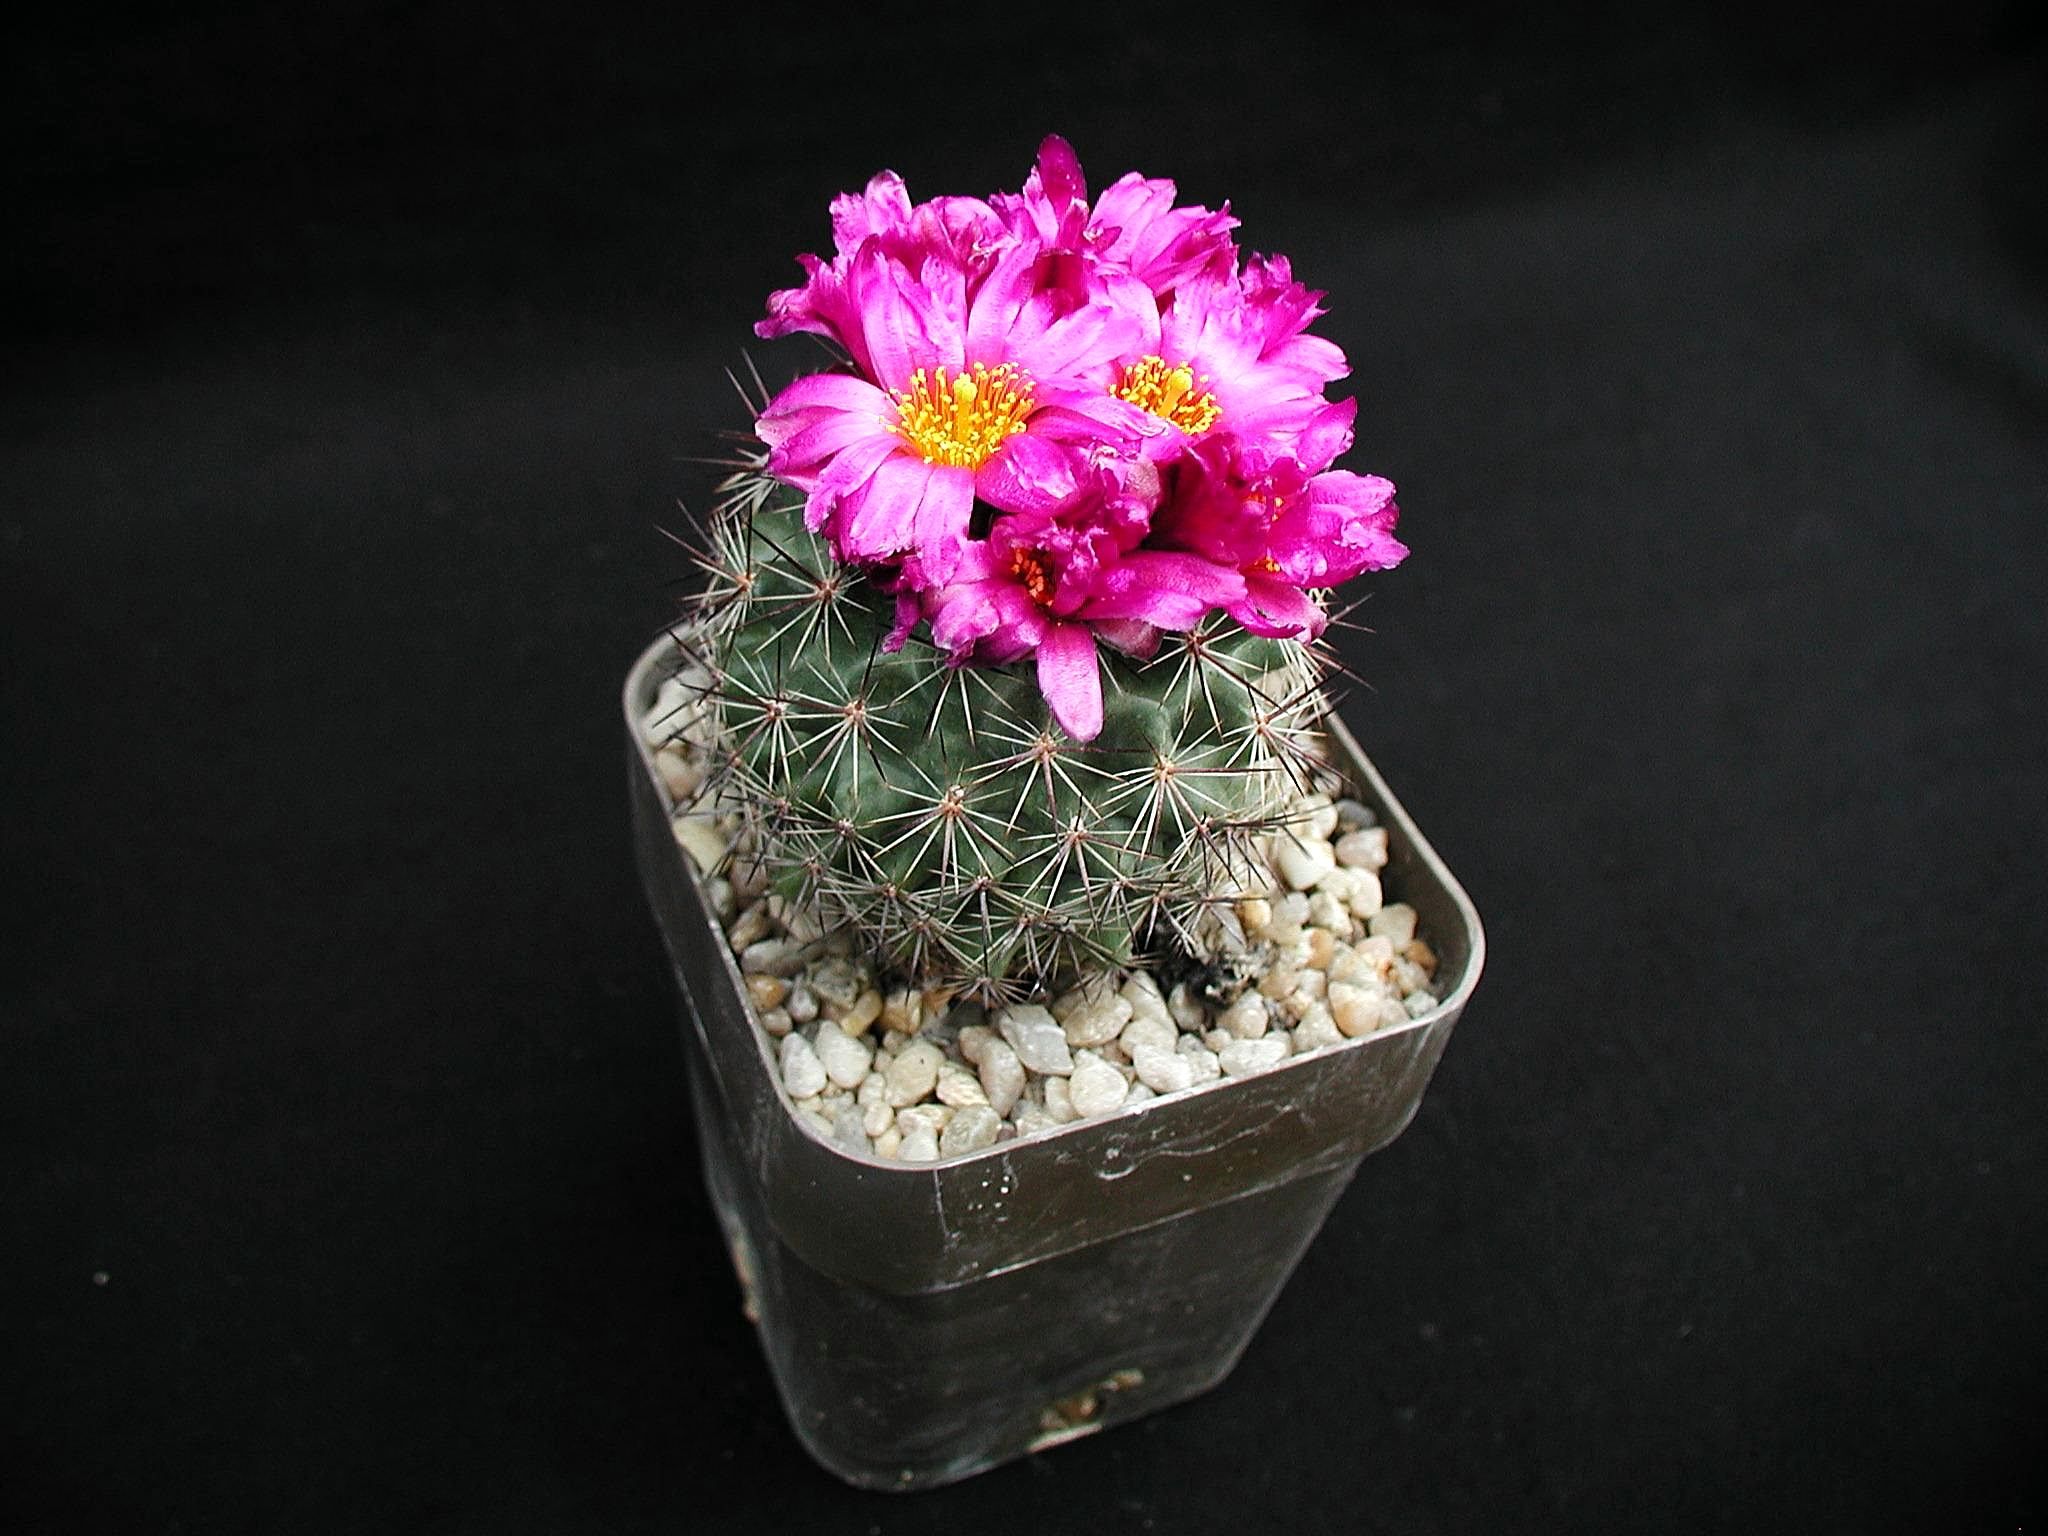 File:Pink flower of cactus plant.jpg - Wikimedia Commons